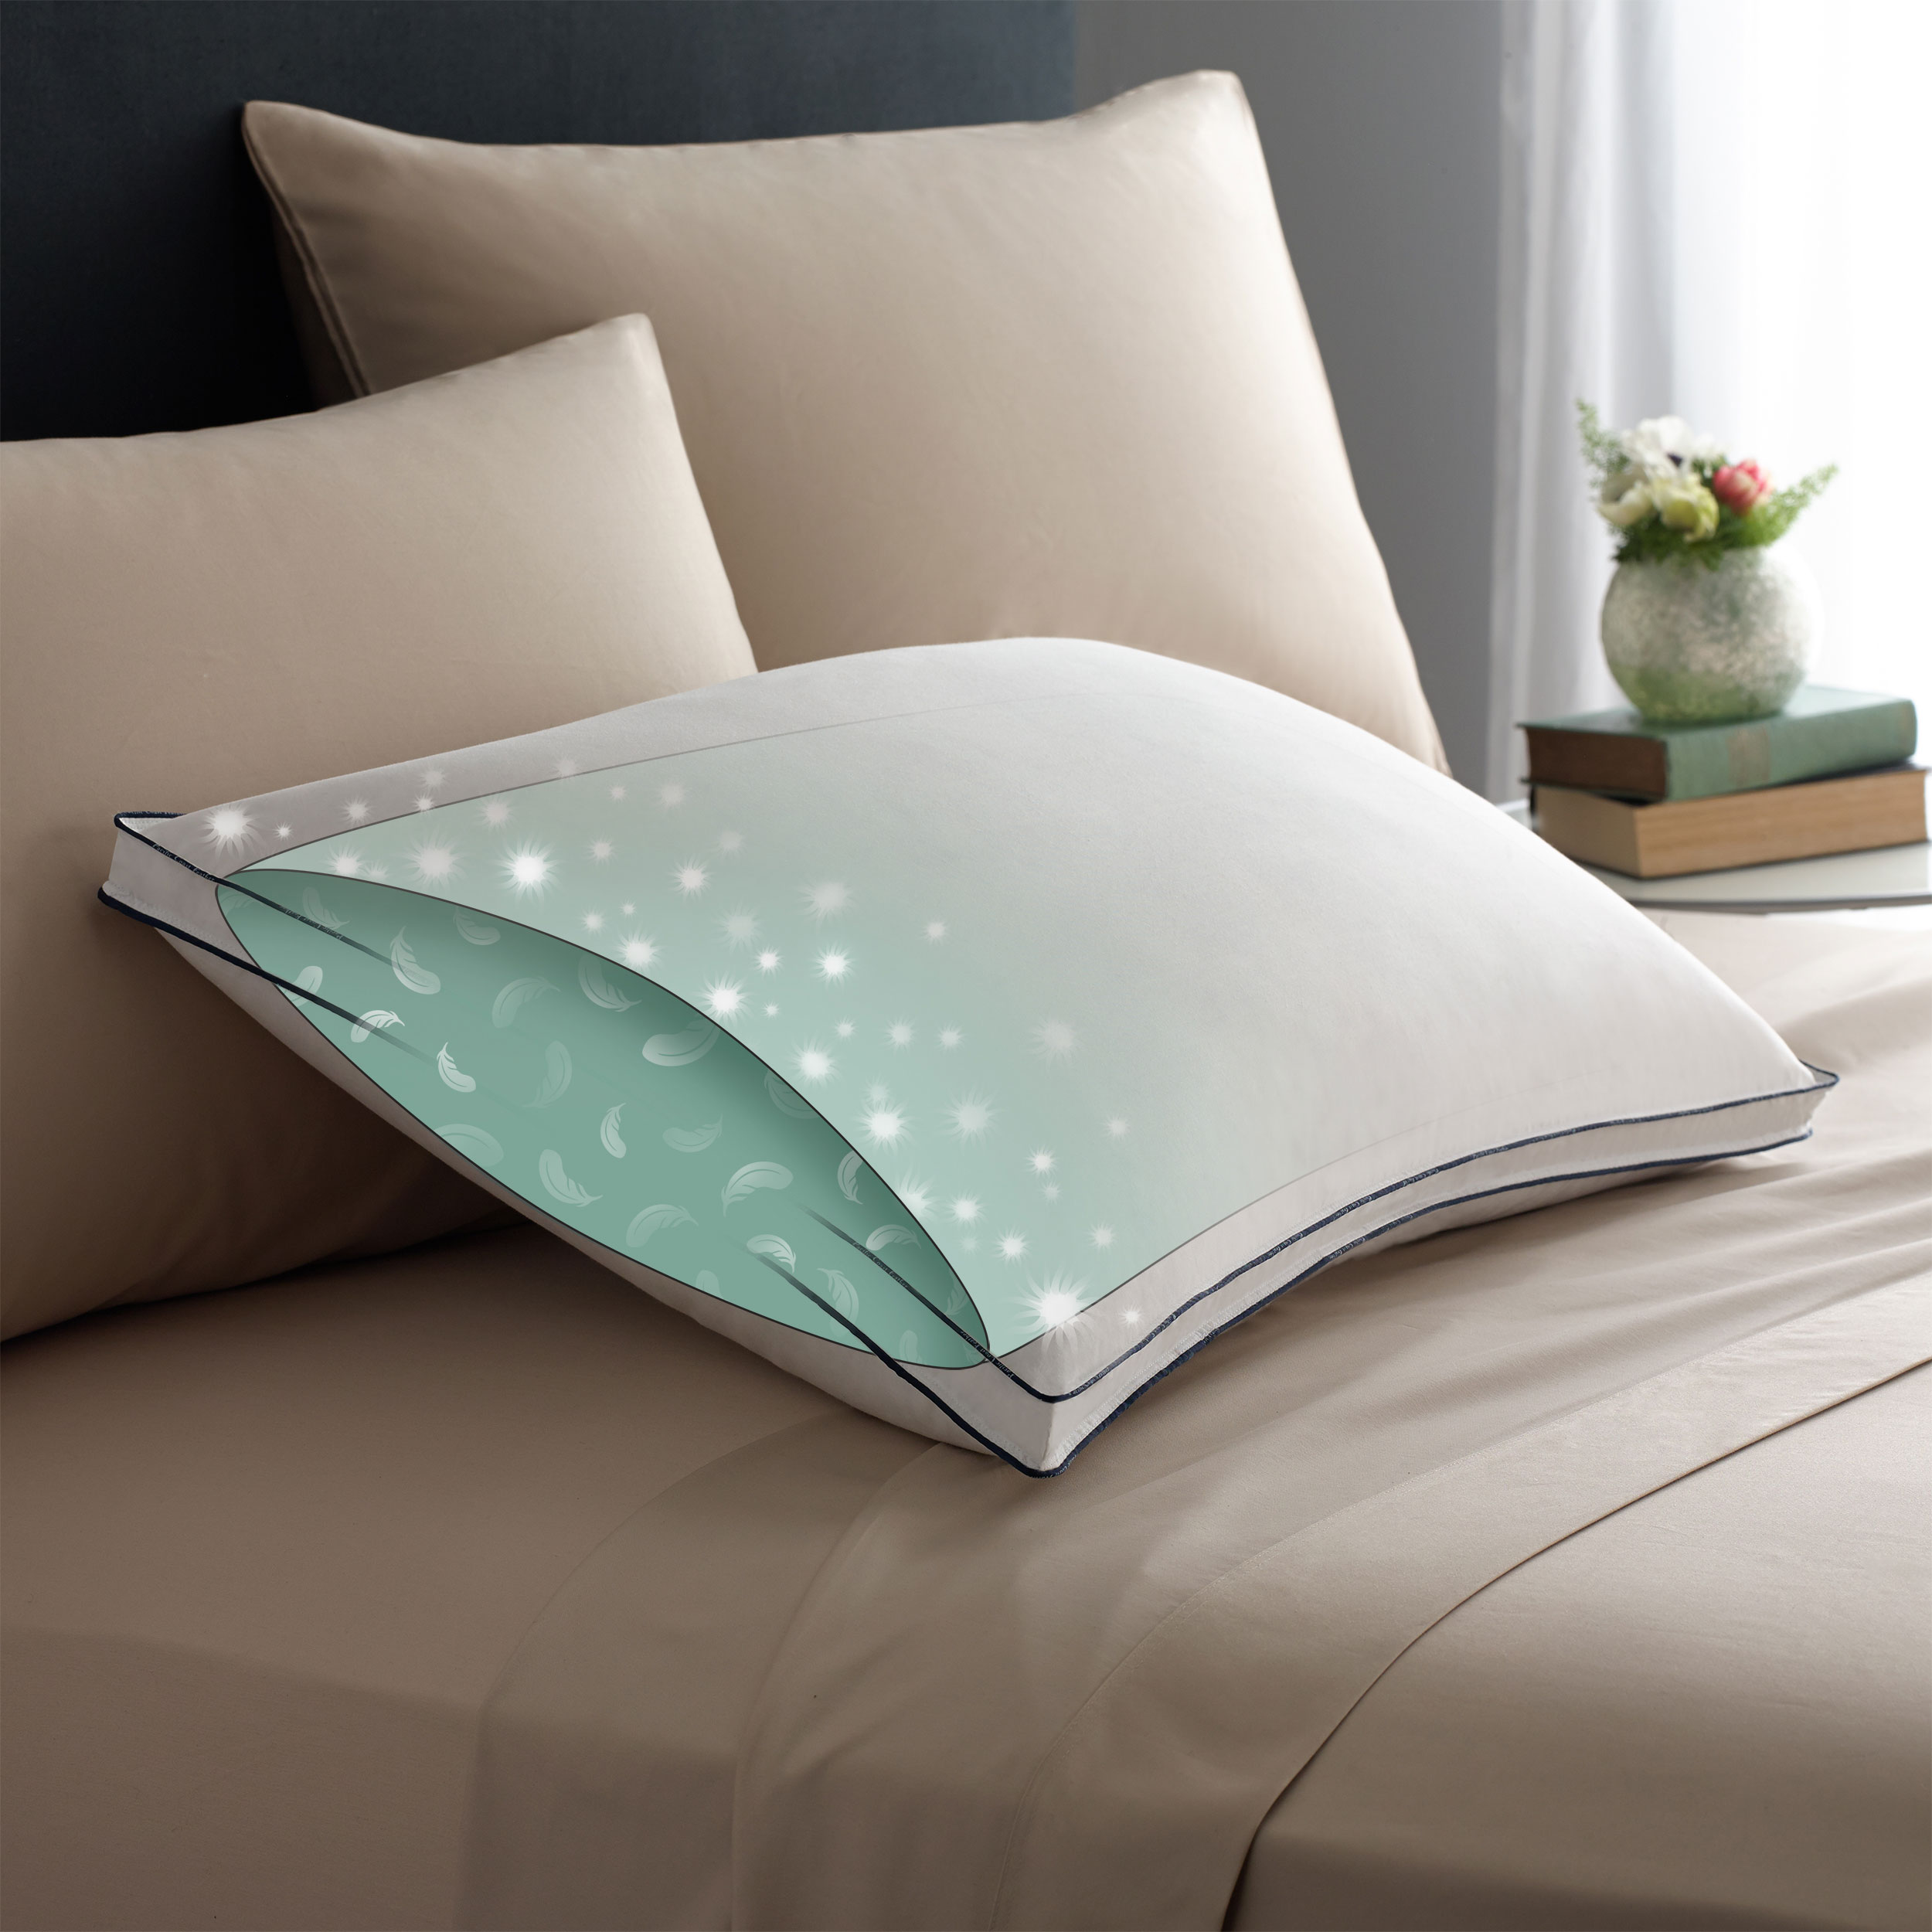 Pacific Coast Double Downaround Soft Pillow 300 Thread Count 550 Fill Power Down & Resilia Feathers - King